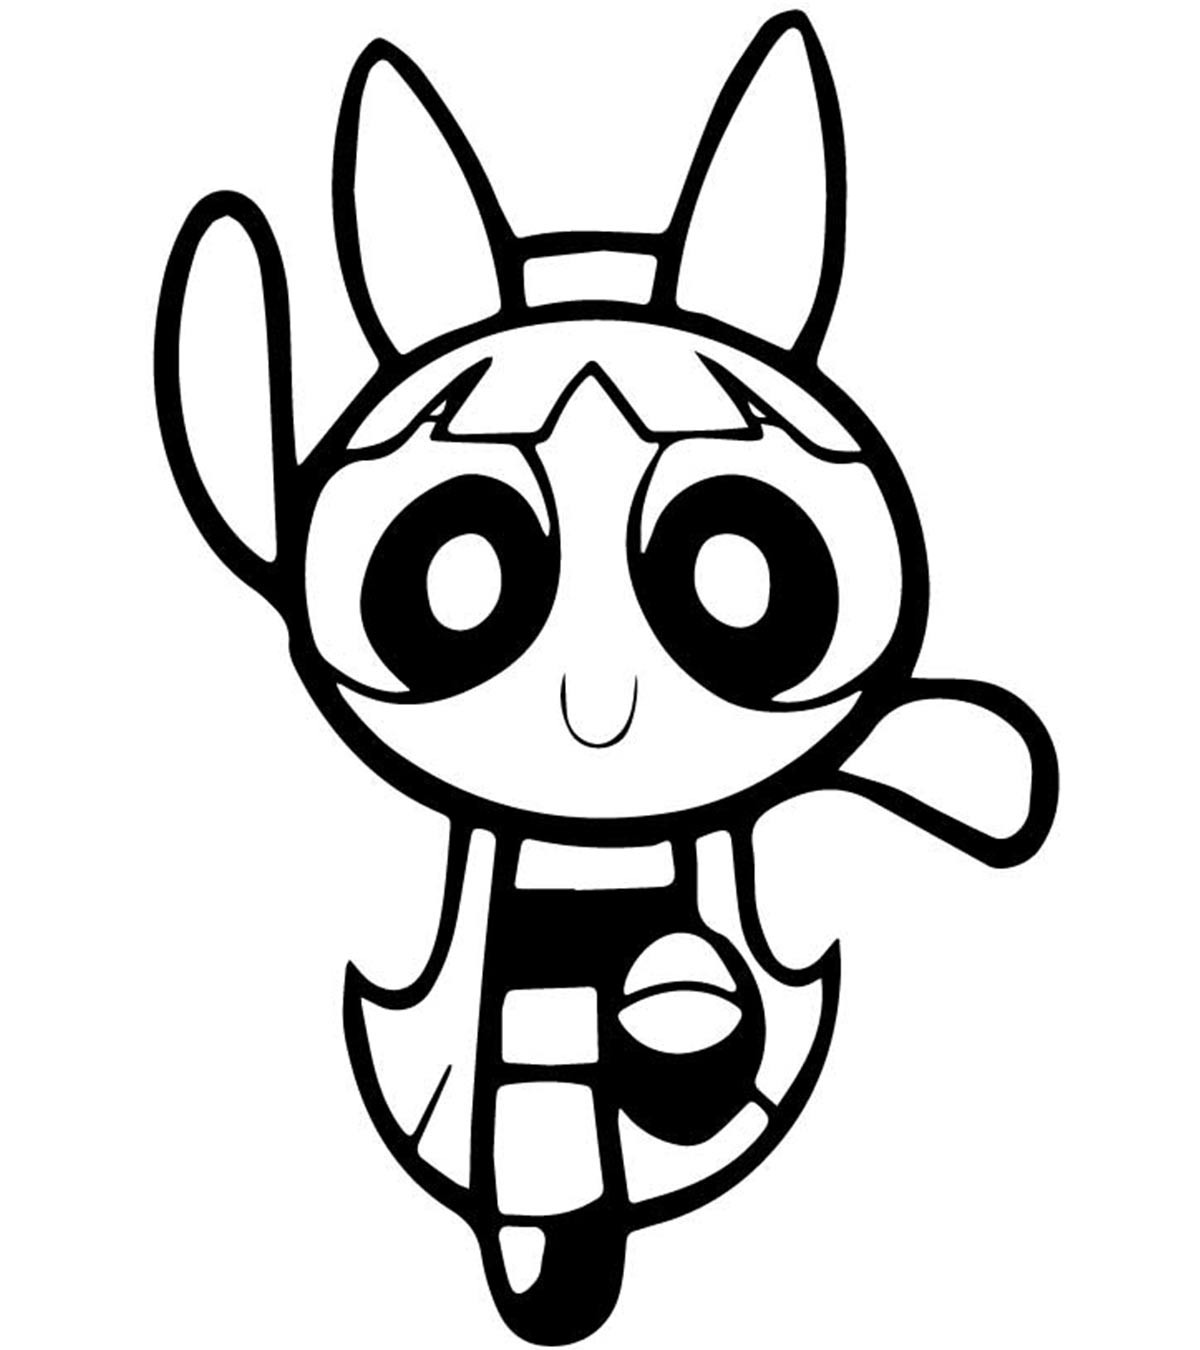 Powerpuff Girls Coloring Book
 Cartoon Coloring Pages MomJunction